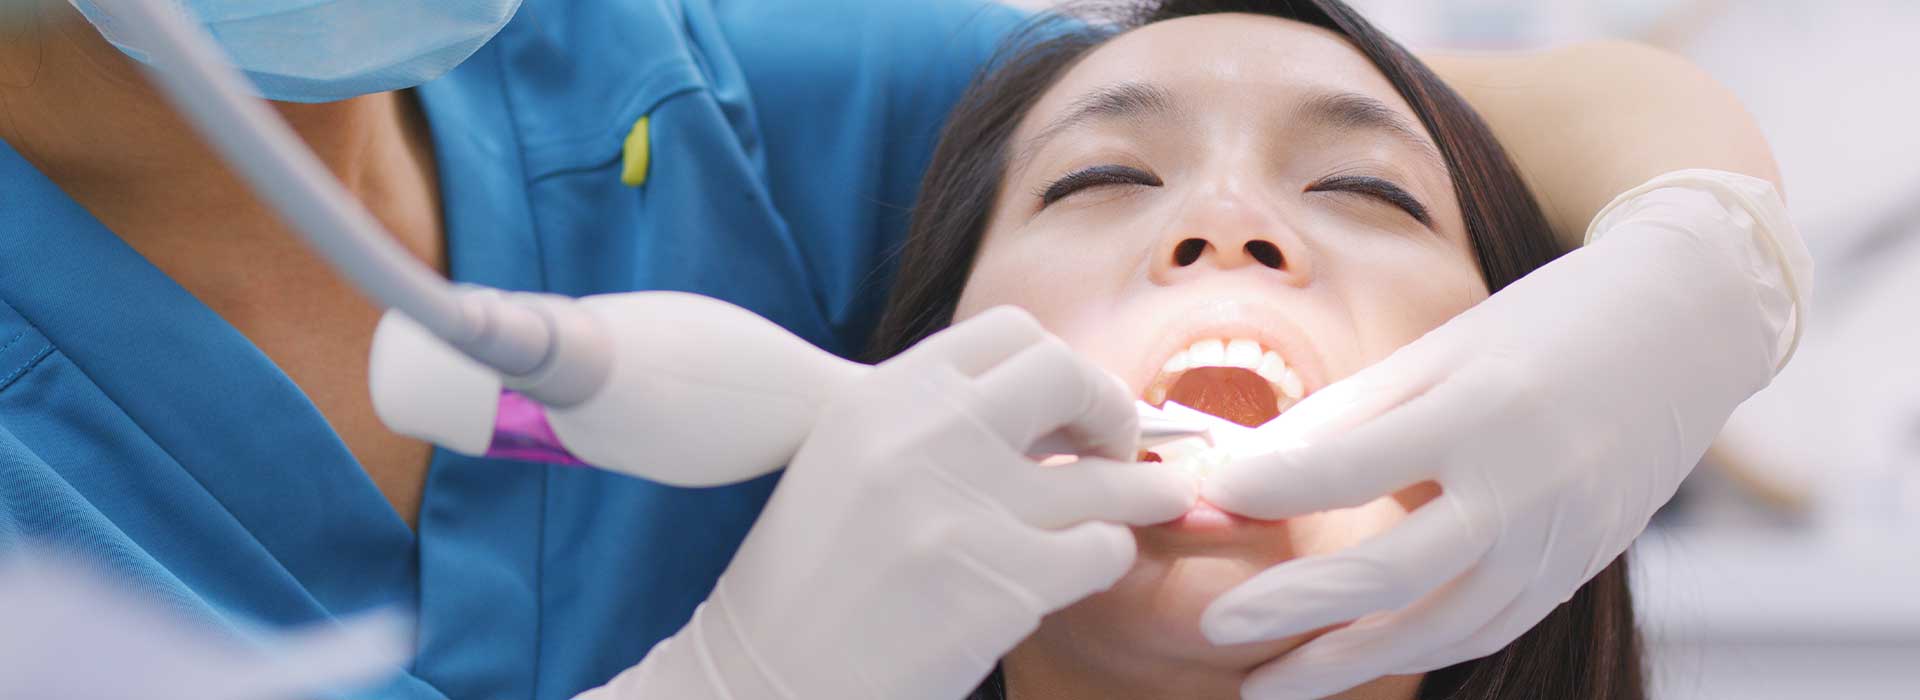 Dentist doing a root planing procedure for her patient